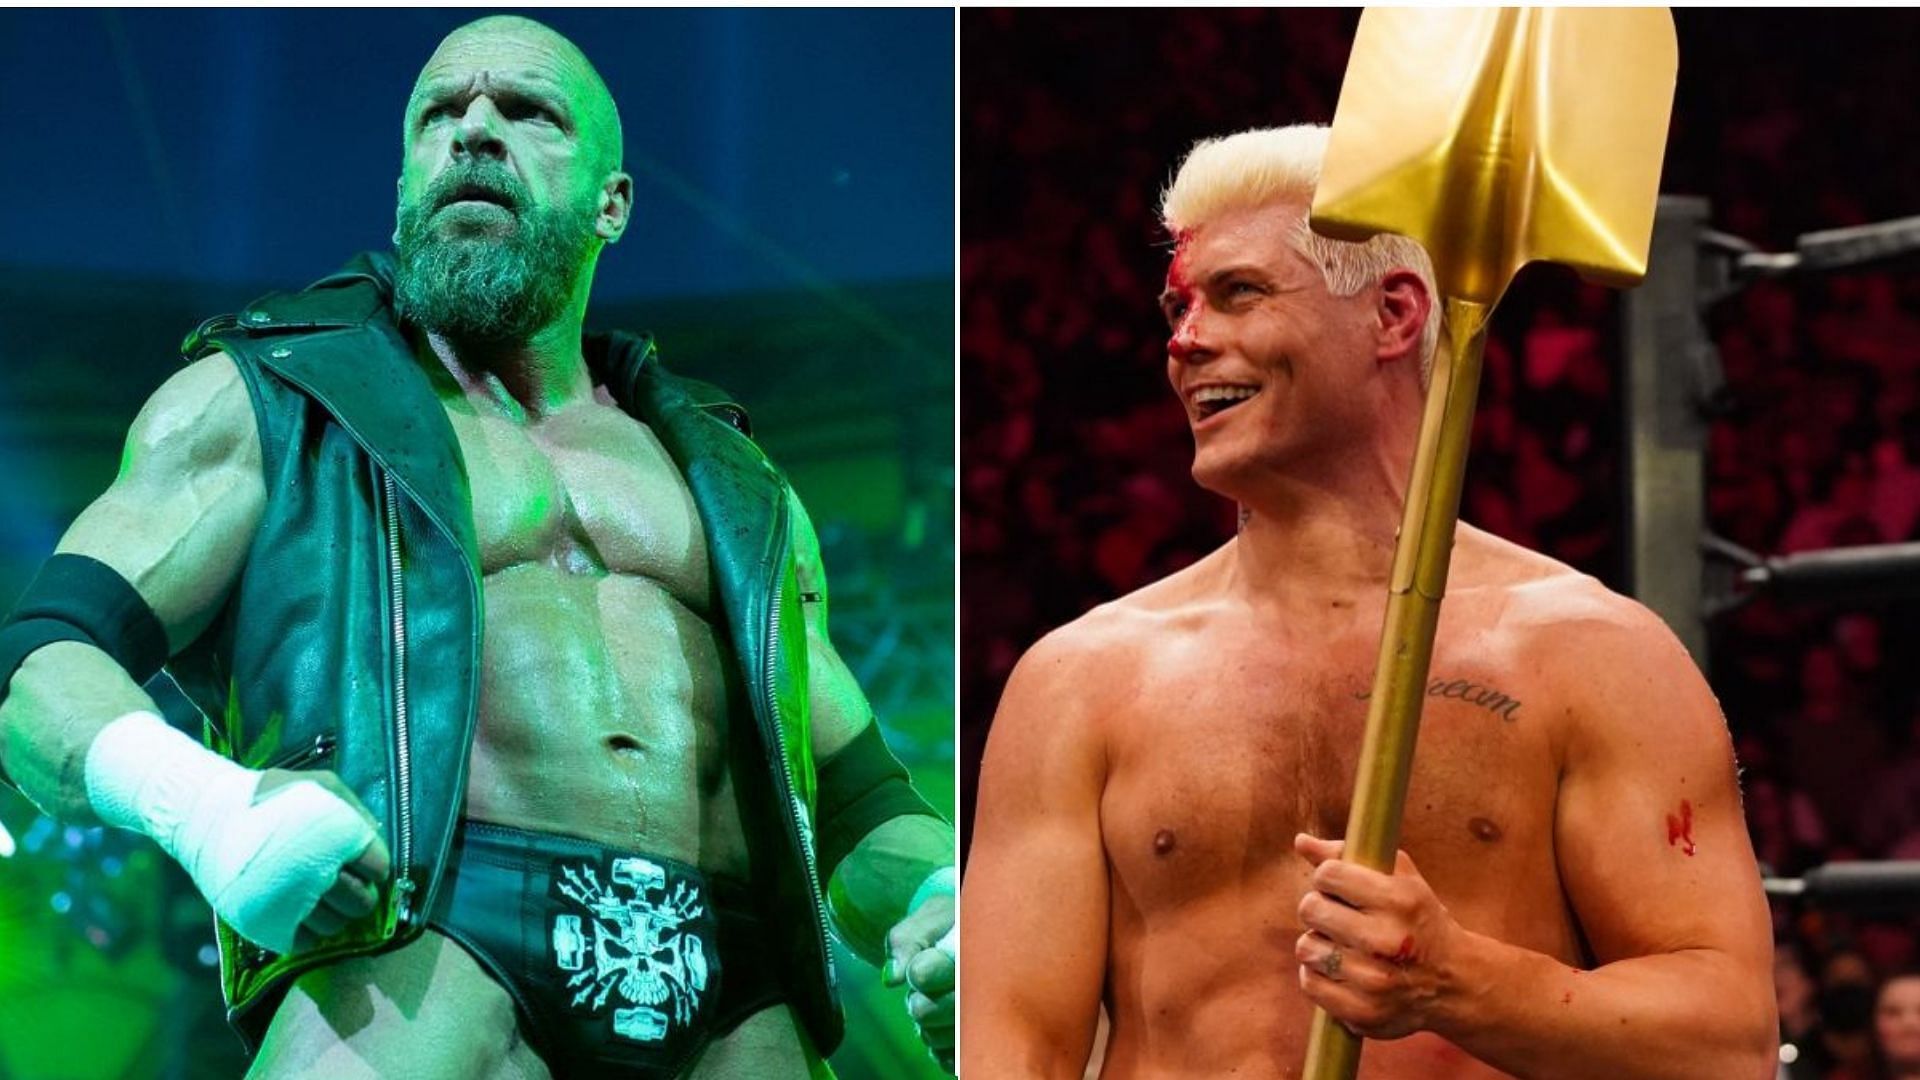 The American Nightmare has played into comparisons to Triple H